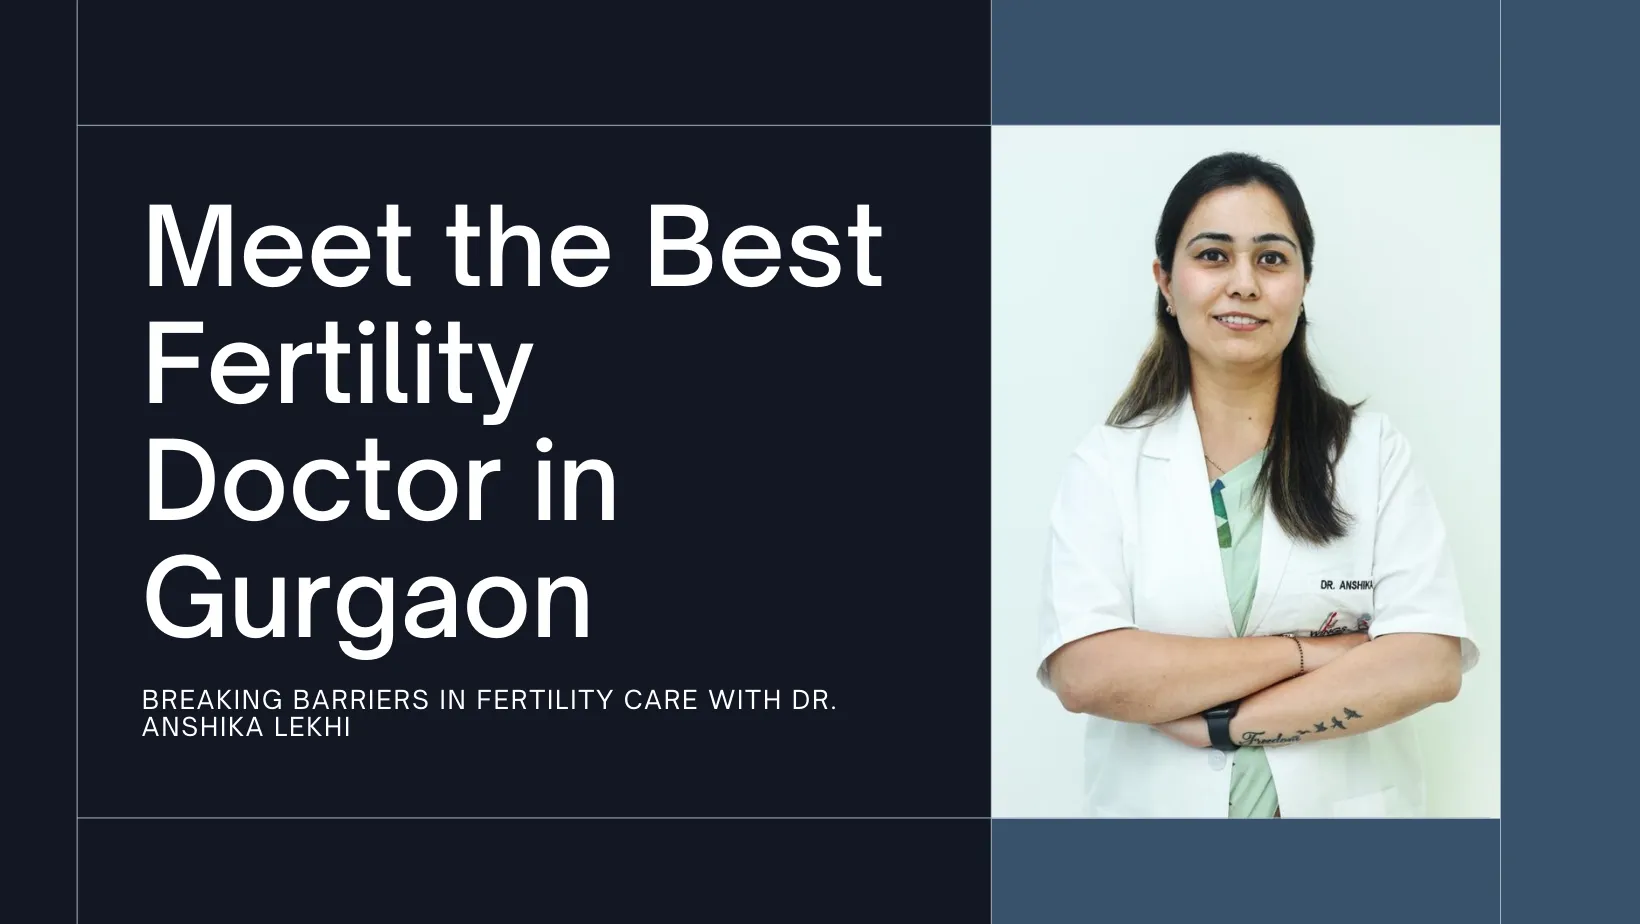 The Best Fertility Doctor in Gurgaon, Breaking Barriers in Fertility Care with Dr. Anshika Lekhi